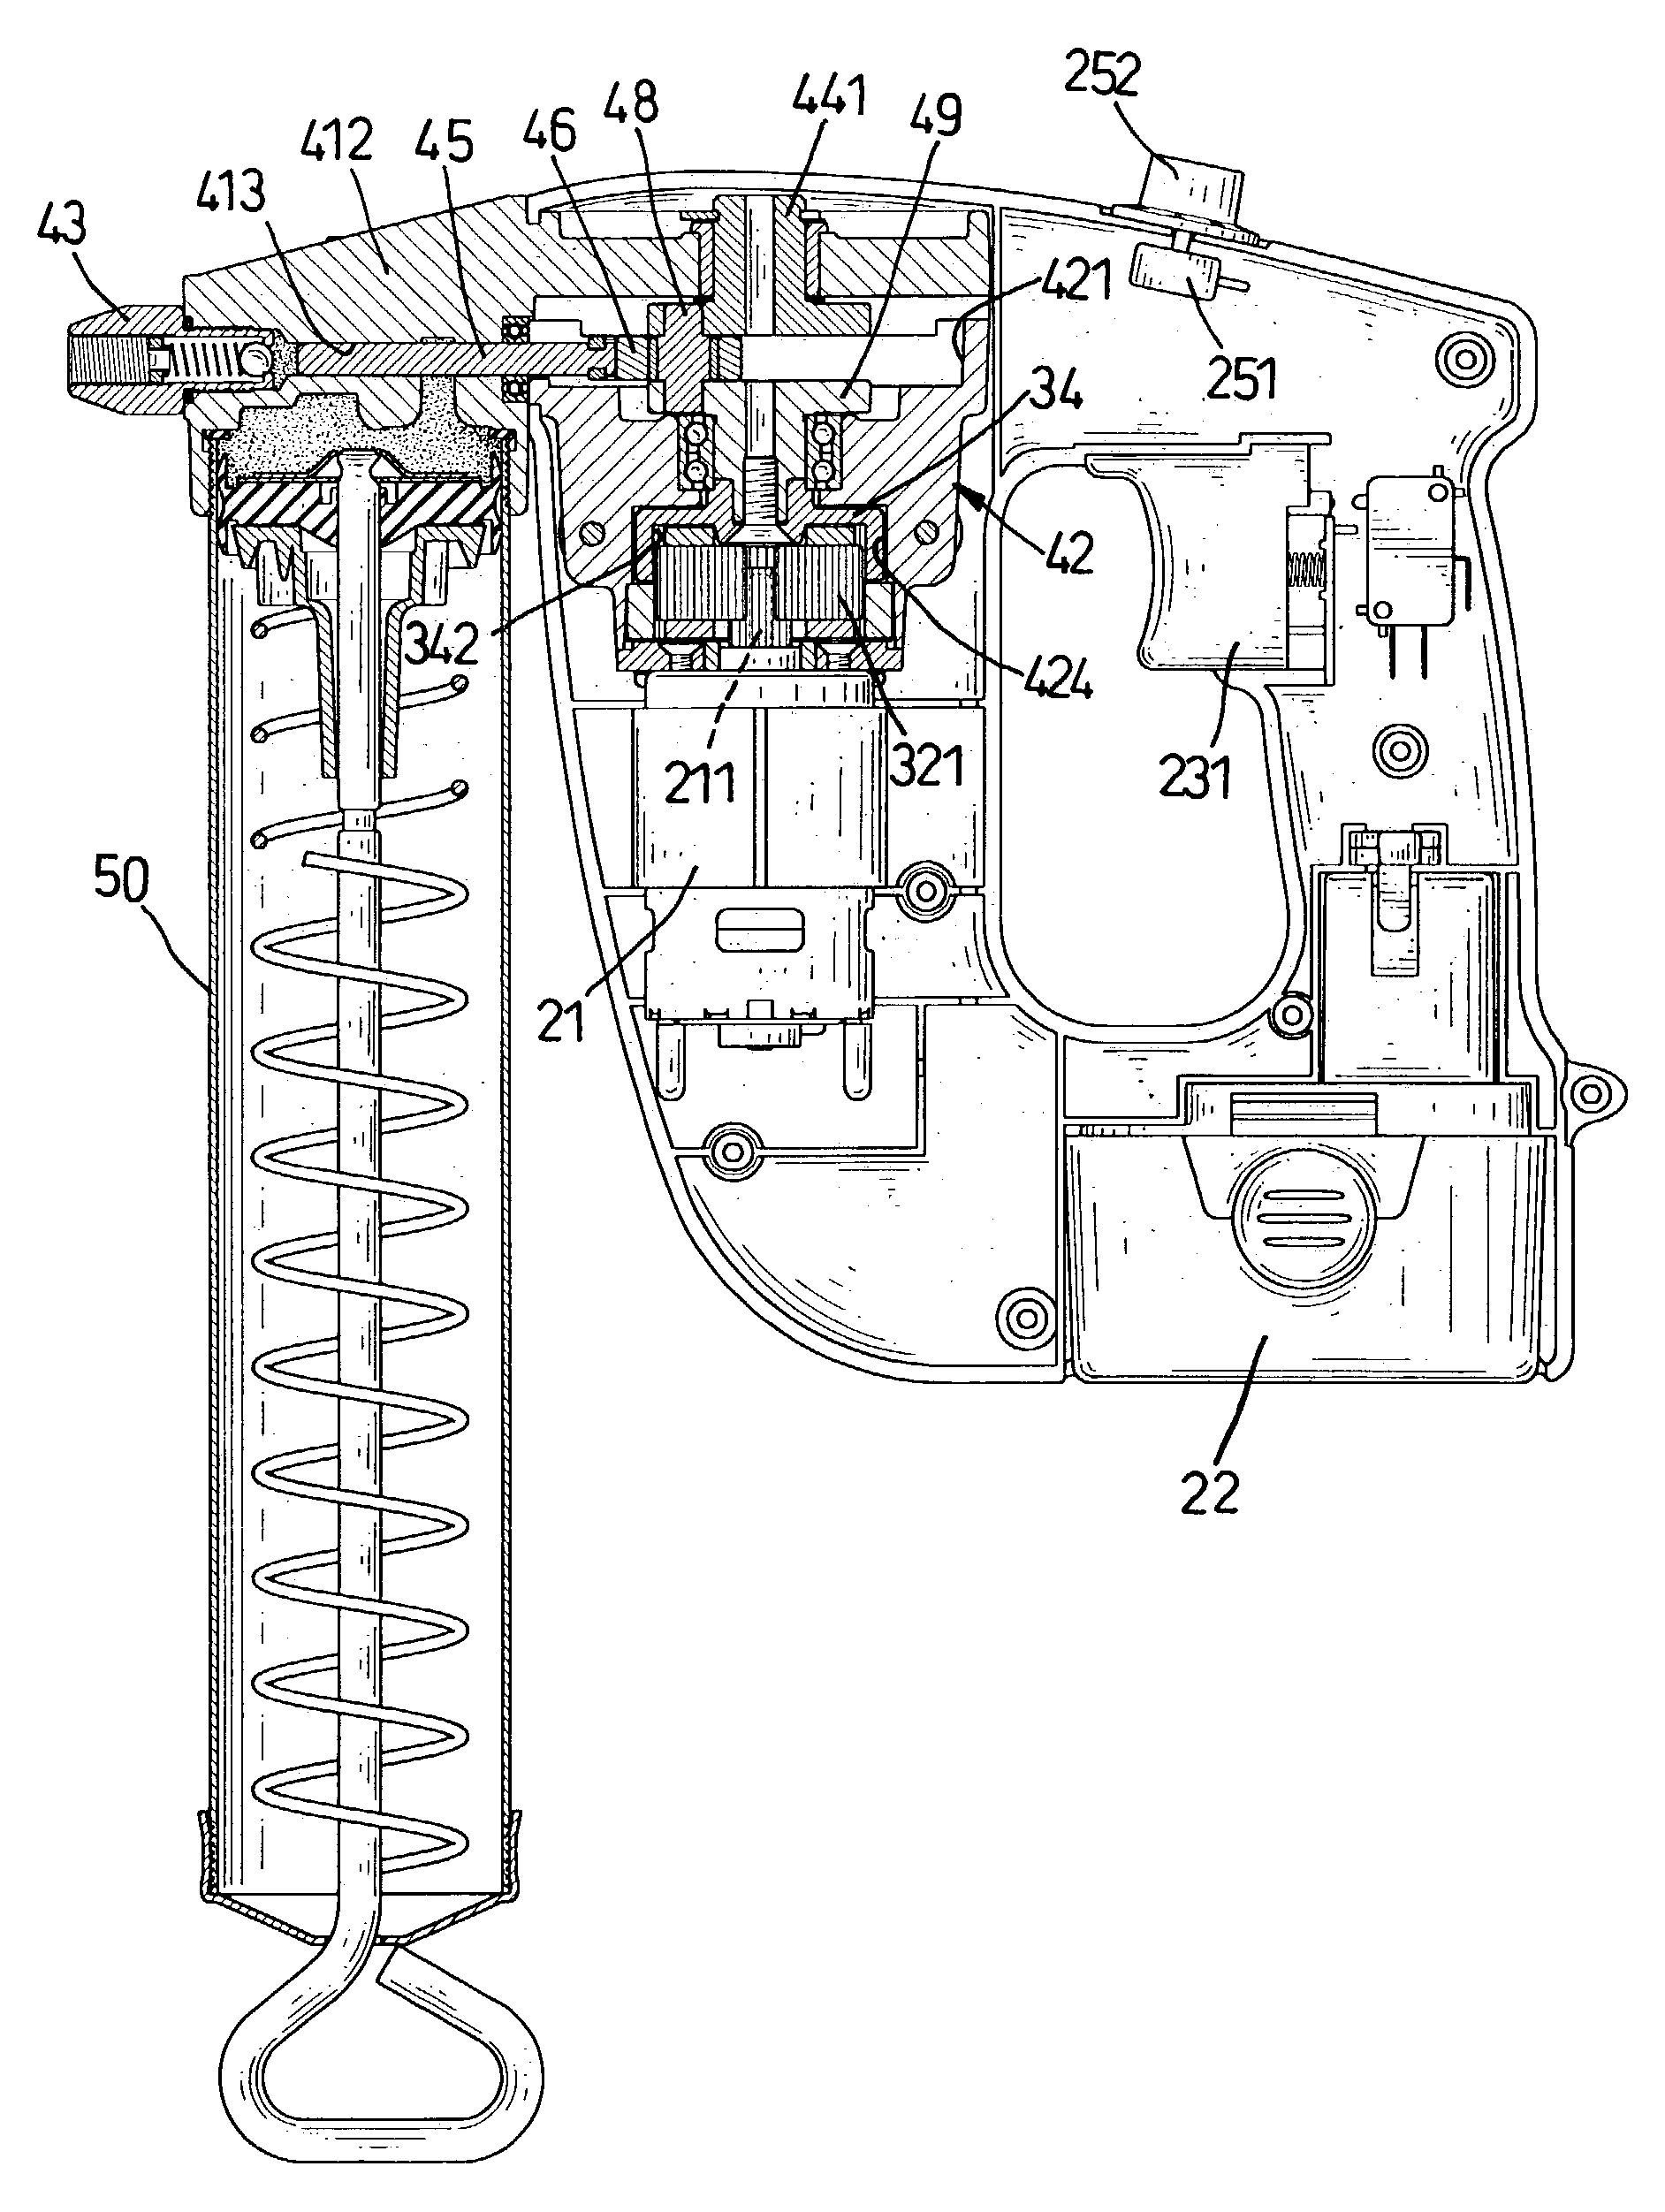 Battery-operated grease gun with an electronic pressure regulator for controlling pressure of the grease